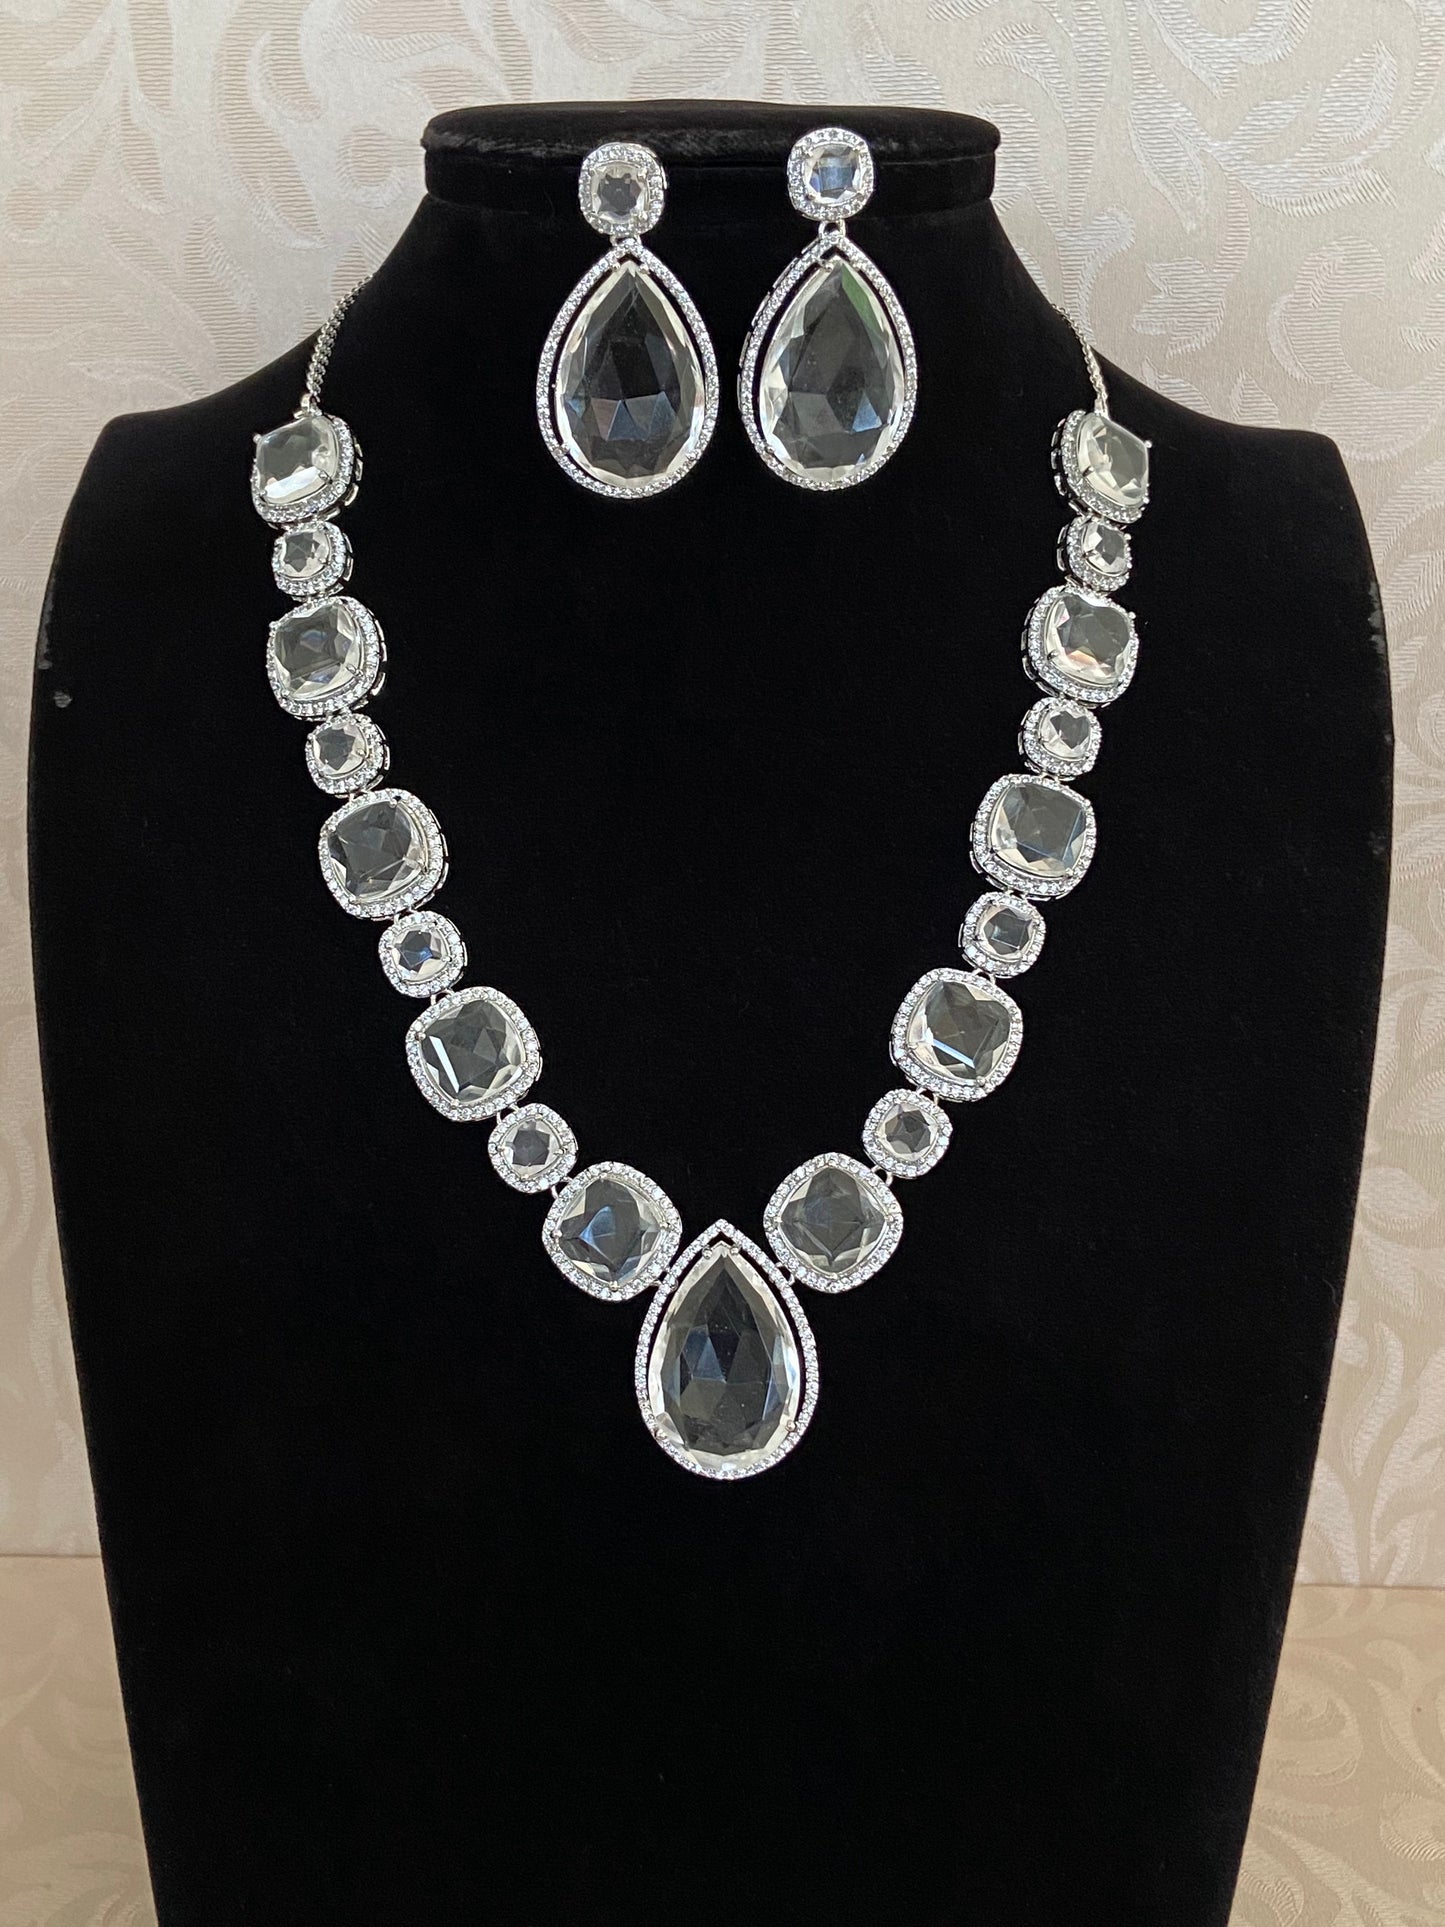 AD necklace | Indian jewelry | Latest Indian jewelry